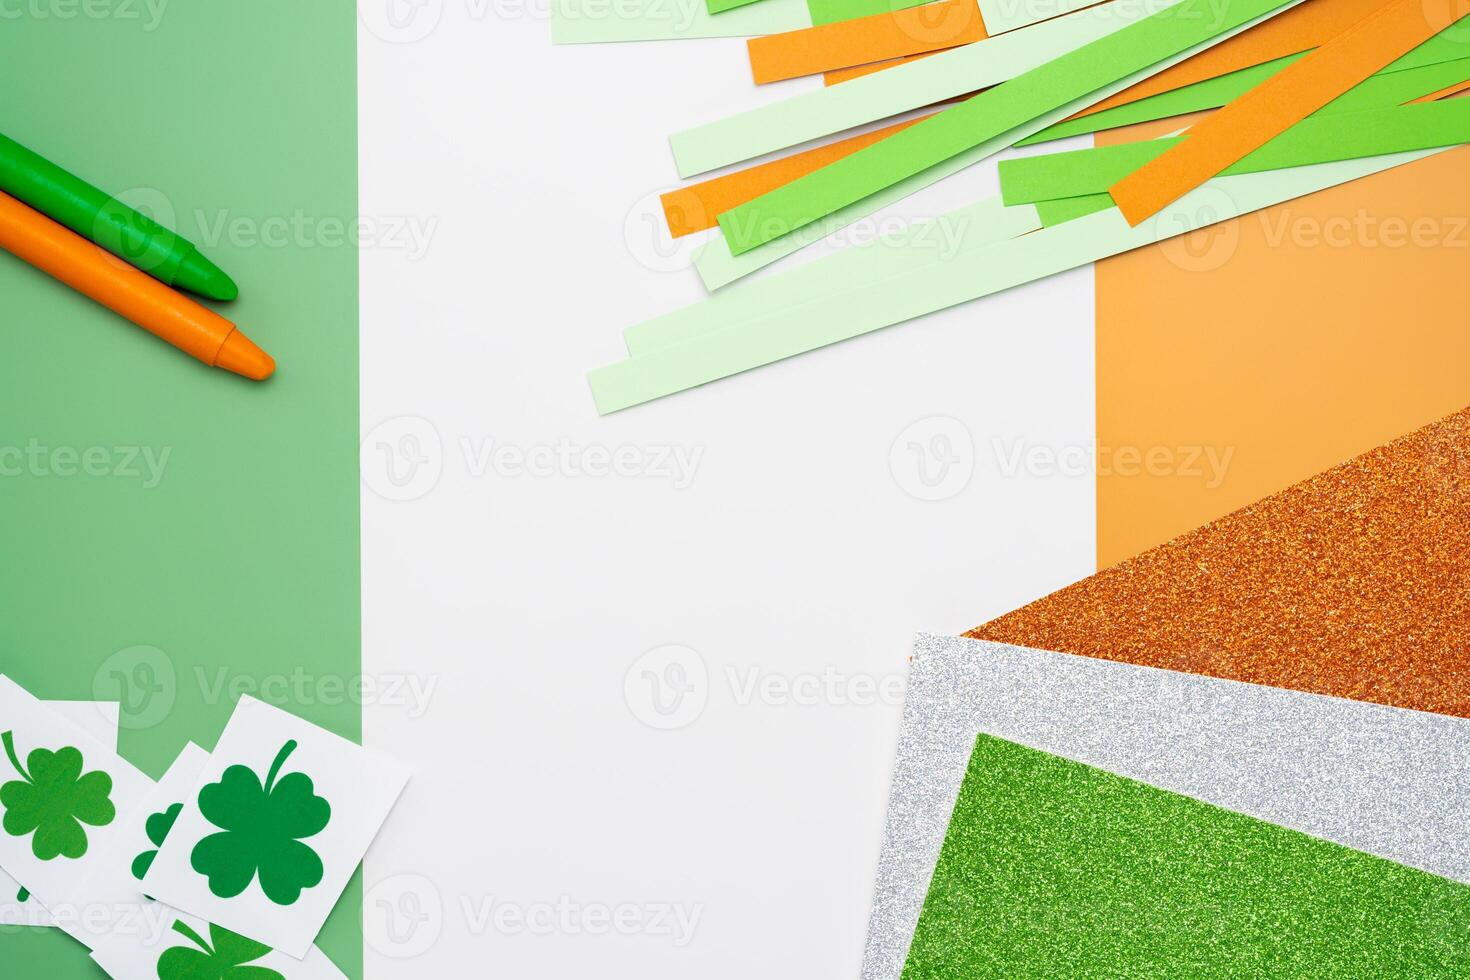 Irish flag made from color paper with cut out shamrock clover crayons and glitter paper photo